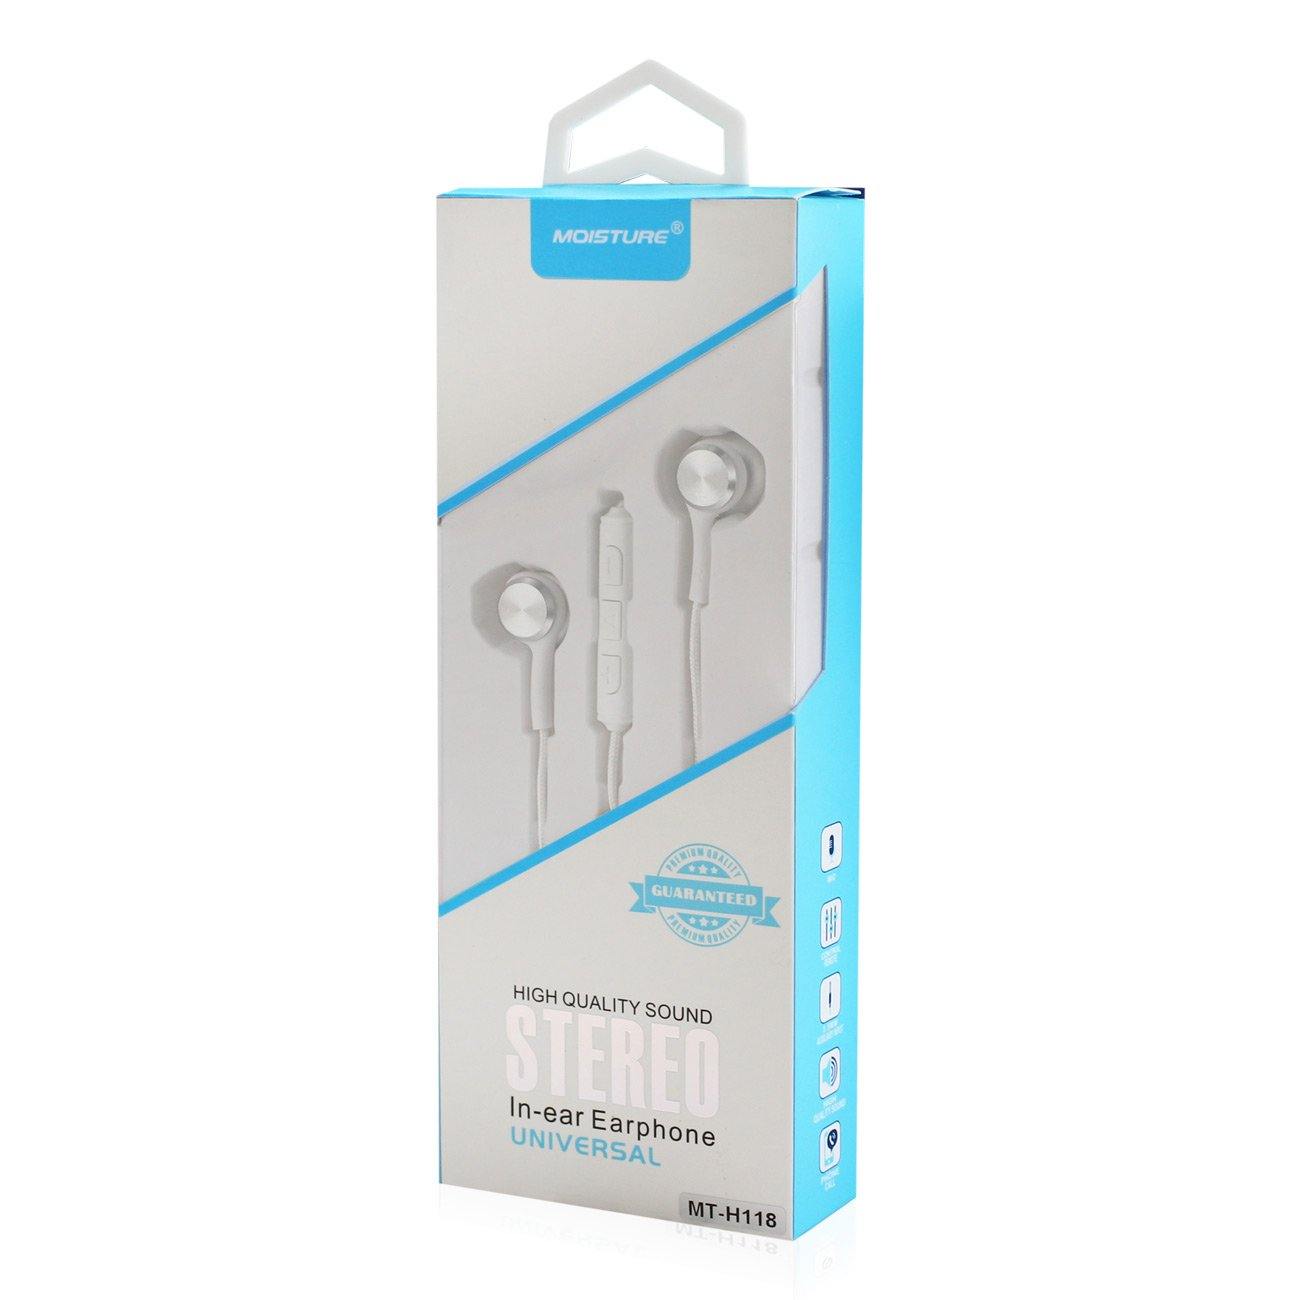 Moisture High Quality Sound Universal In-ear Earphones In Silver